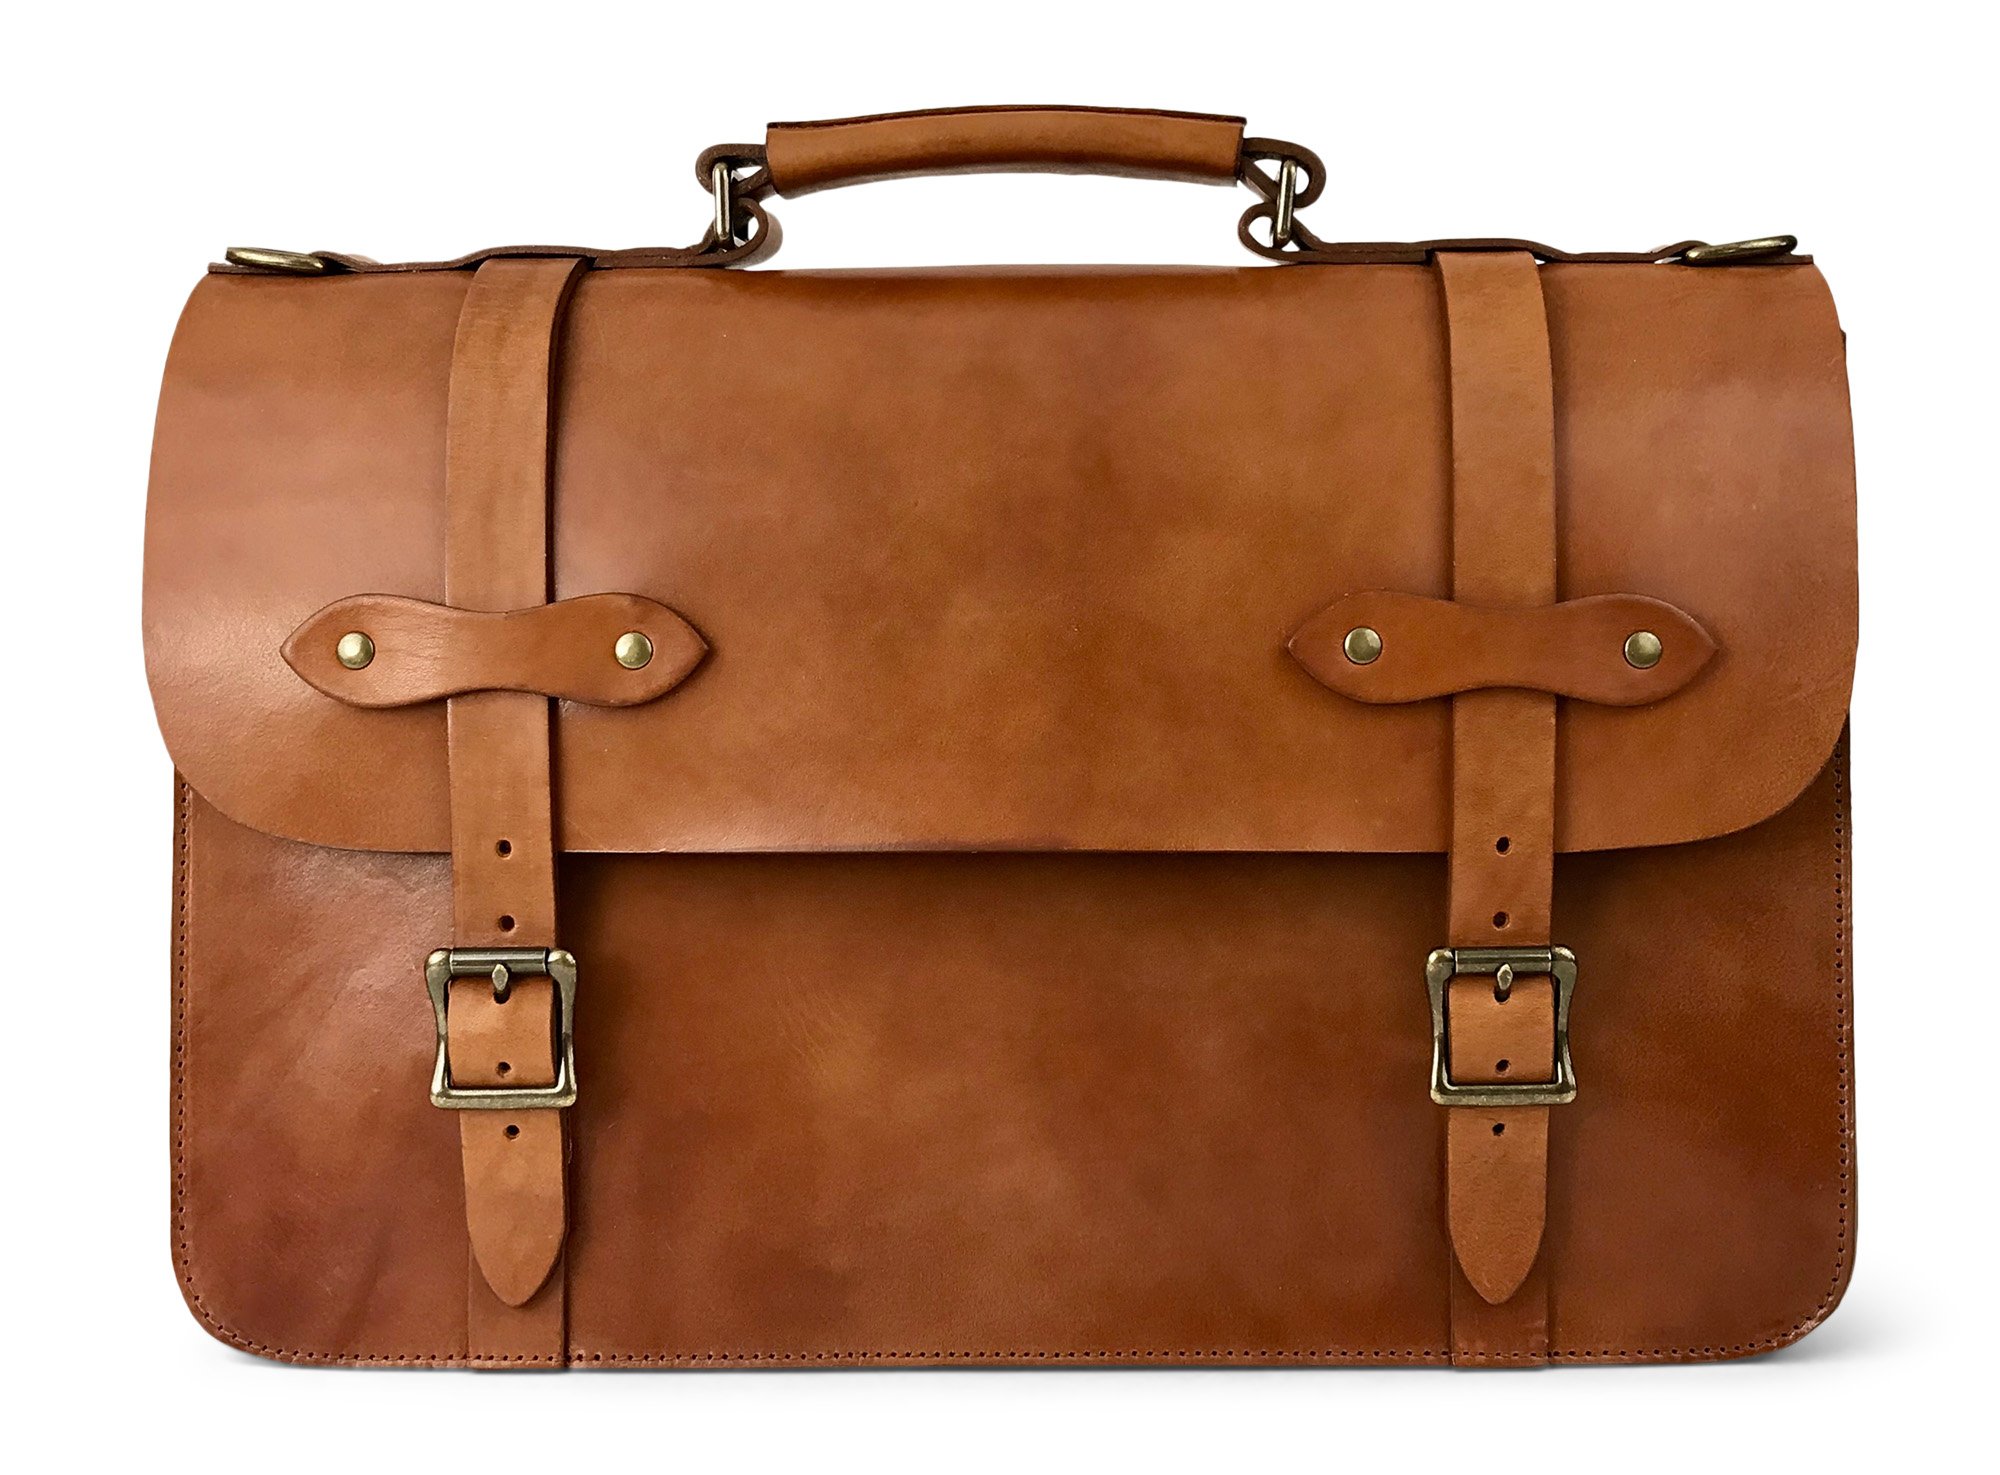 Full Grain Leather Briefcase Made in USA | Vintage Lawyer Briefcase ...